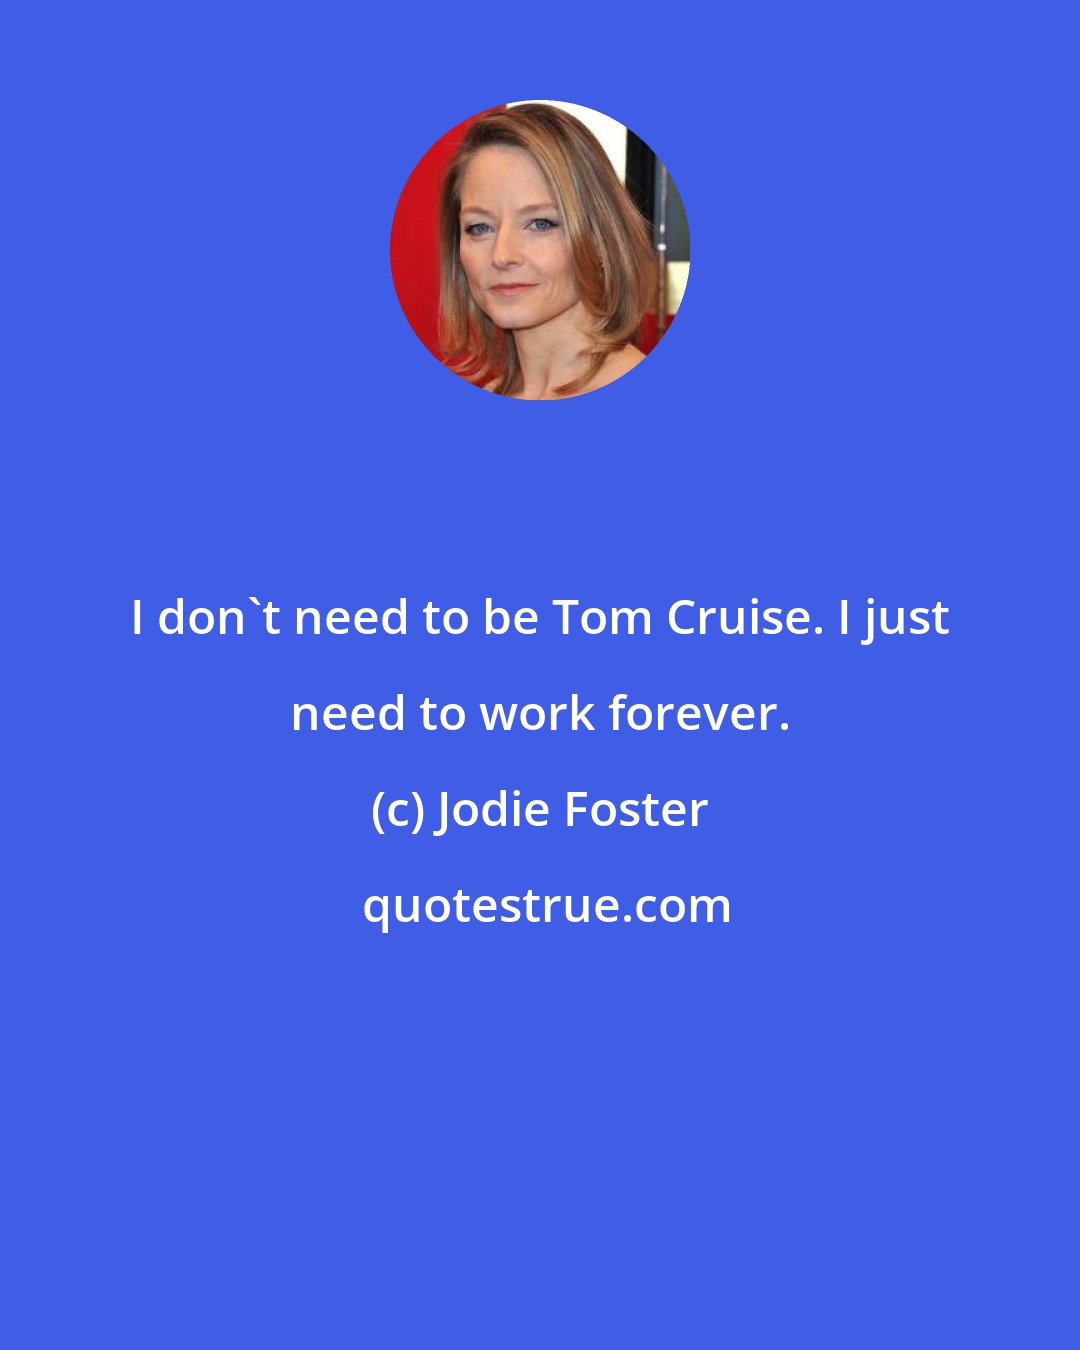 Jodie Foster: I don't need to be Tom Cruise. I just need to work forever.